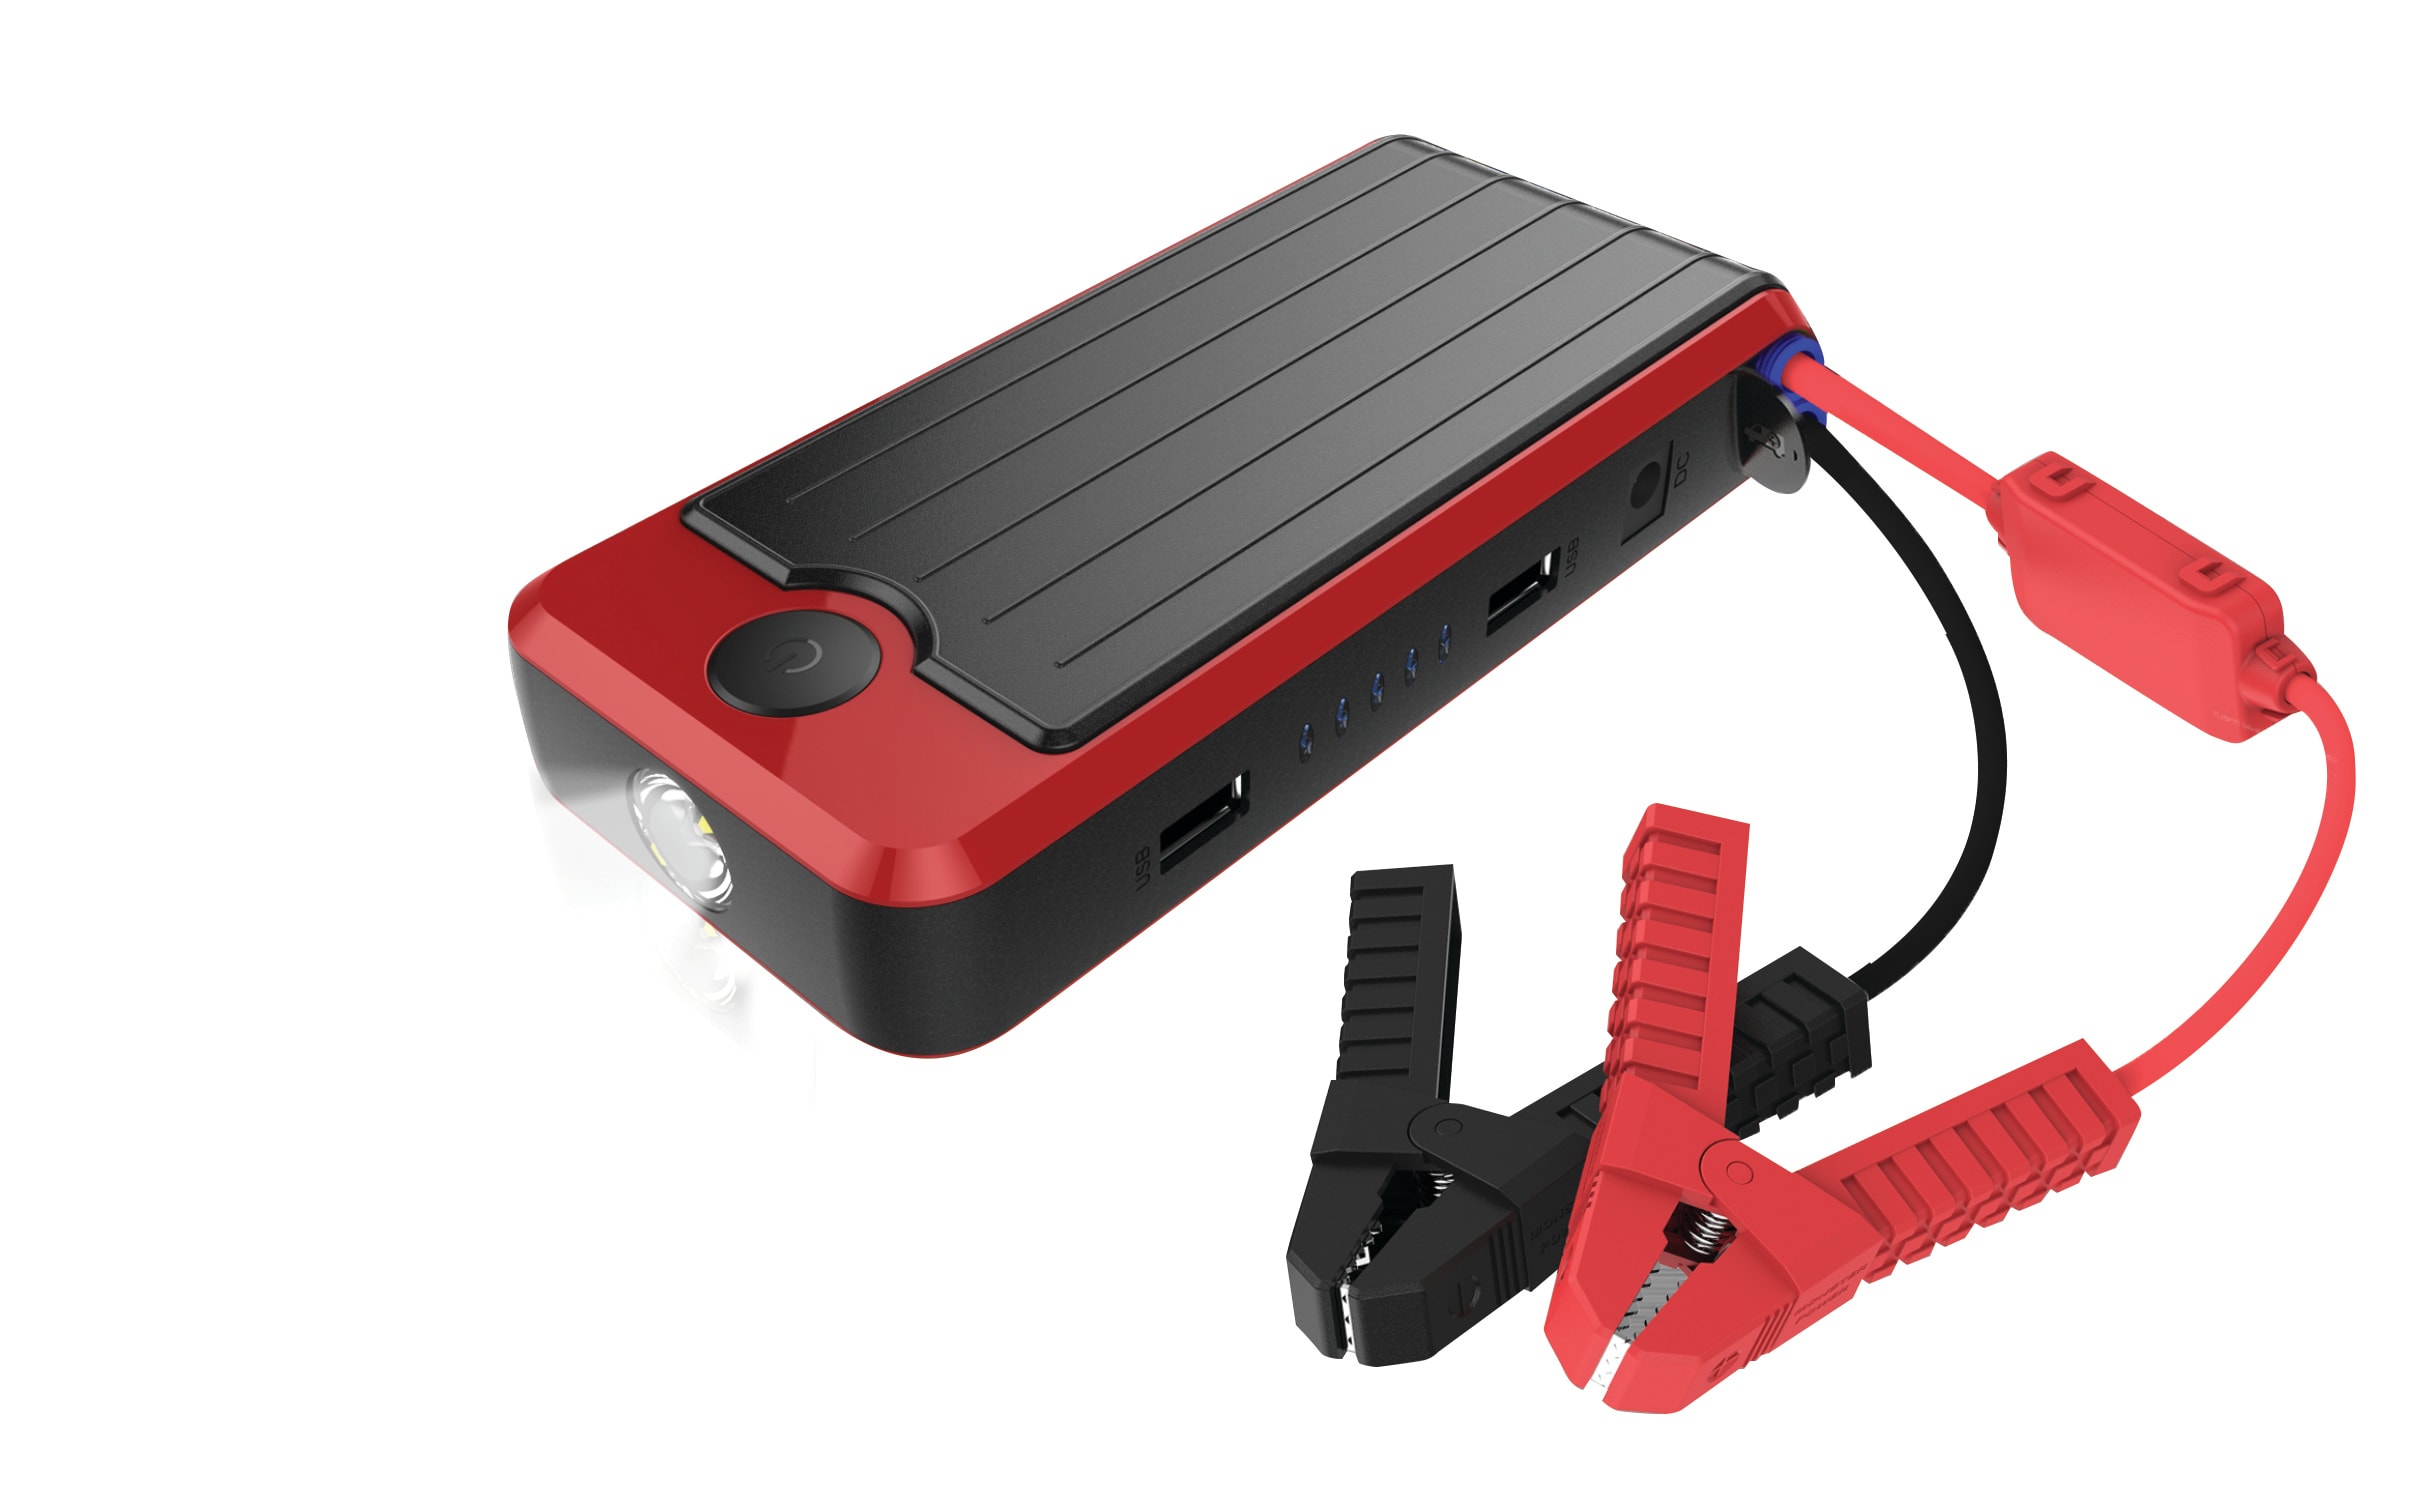 Auto One - ⚡ SJS Power Pack and Jump Starter will get you charged